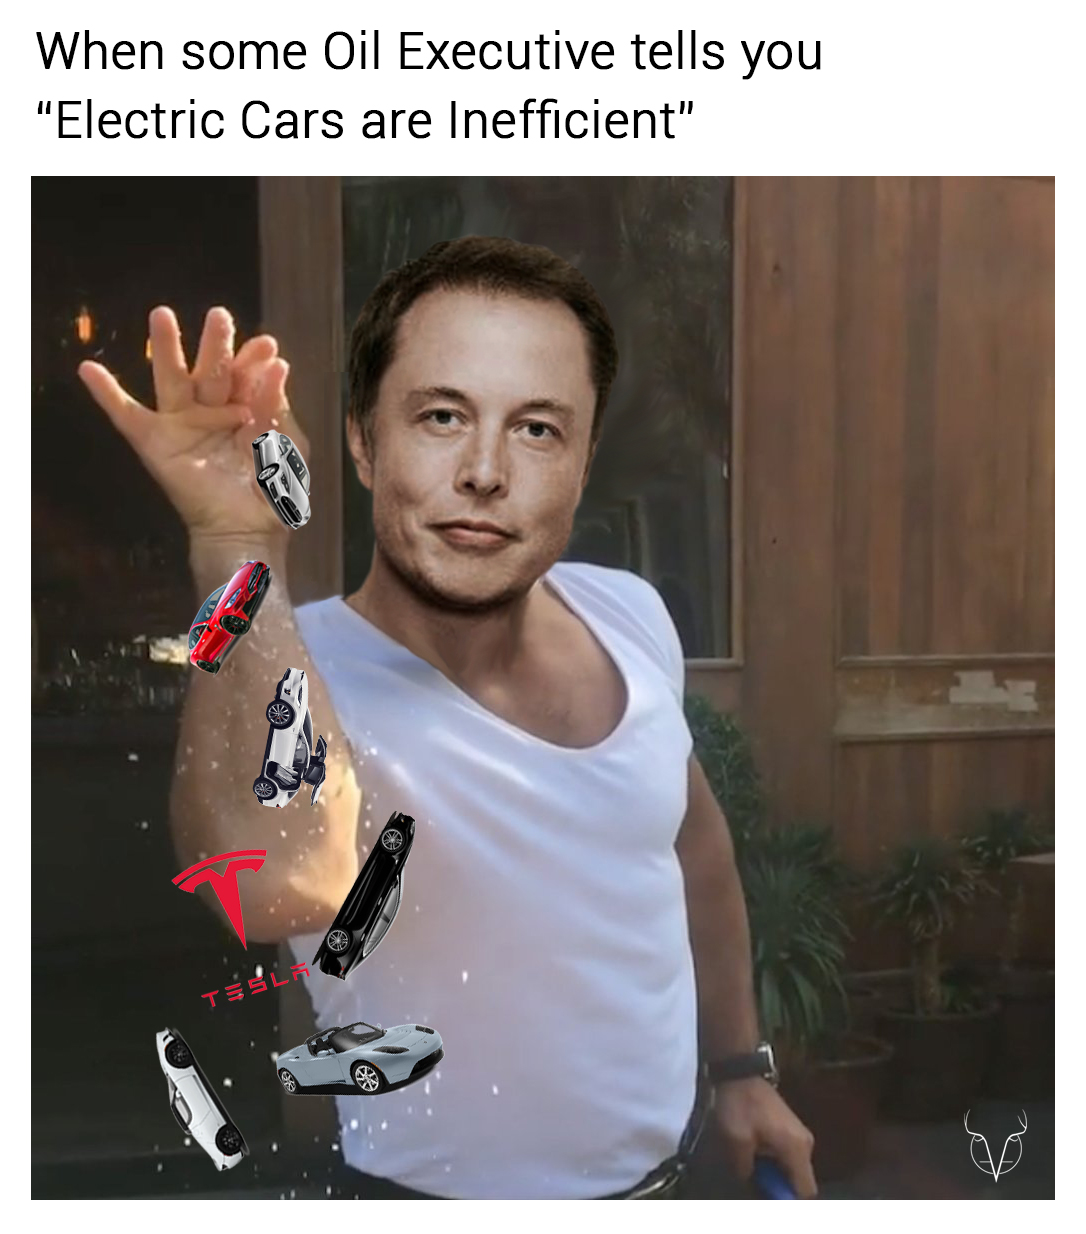 extra guac meme - When some Oil Executive tells you "Electric Cars are Inefficient"